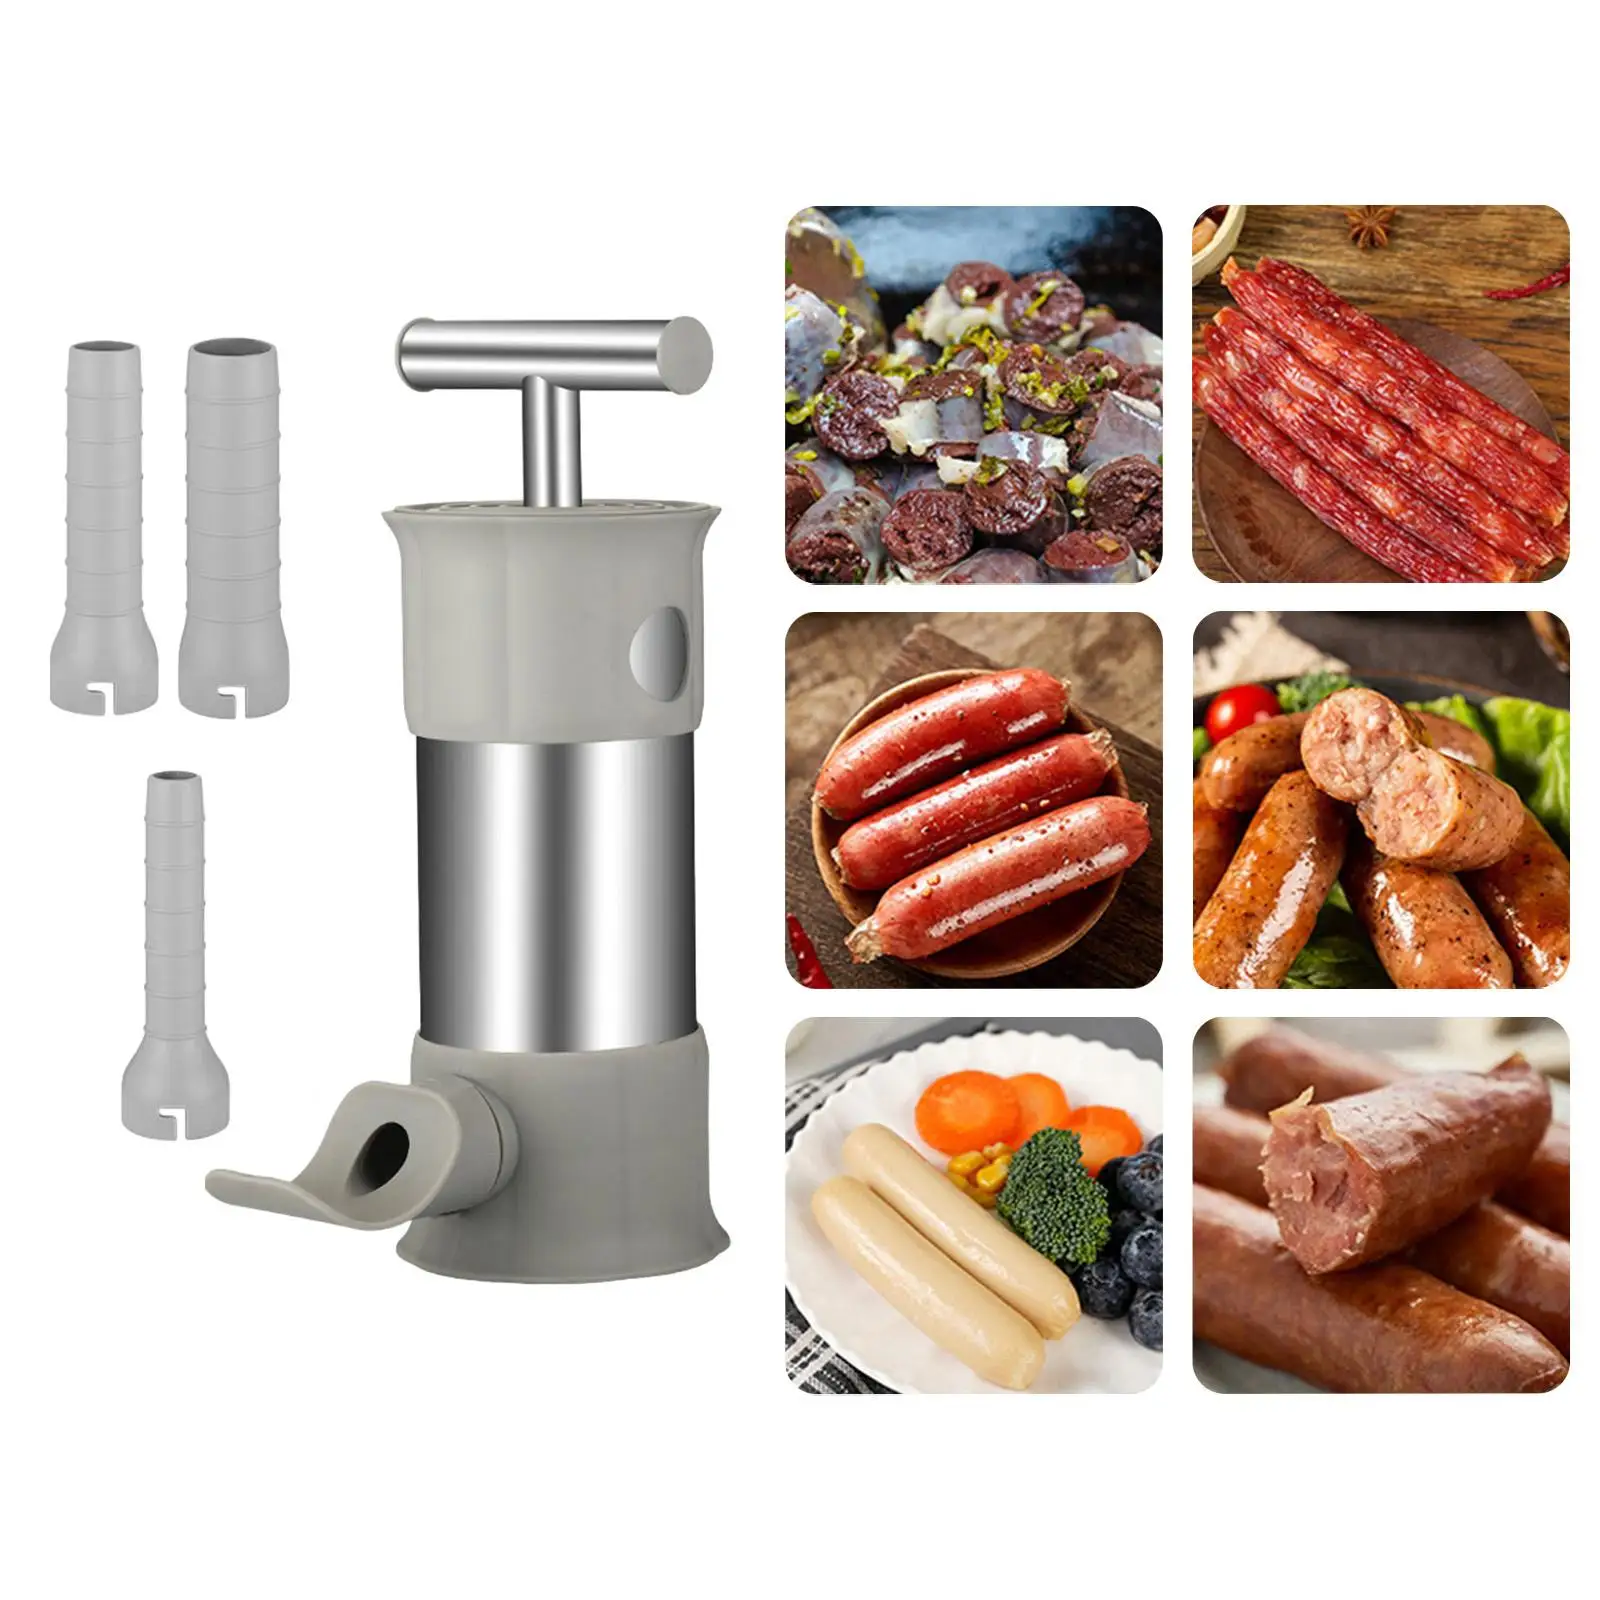 Sausage Filling Tools Multipurpose for Homemade with 4 Nozzle Attachments Stuffing Tubes Meat Grinder Meat Sausage Machine